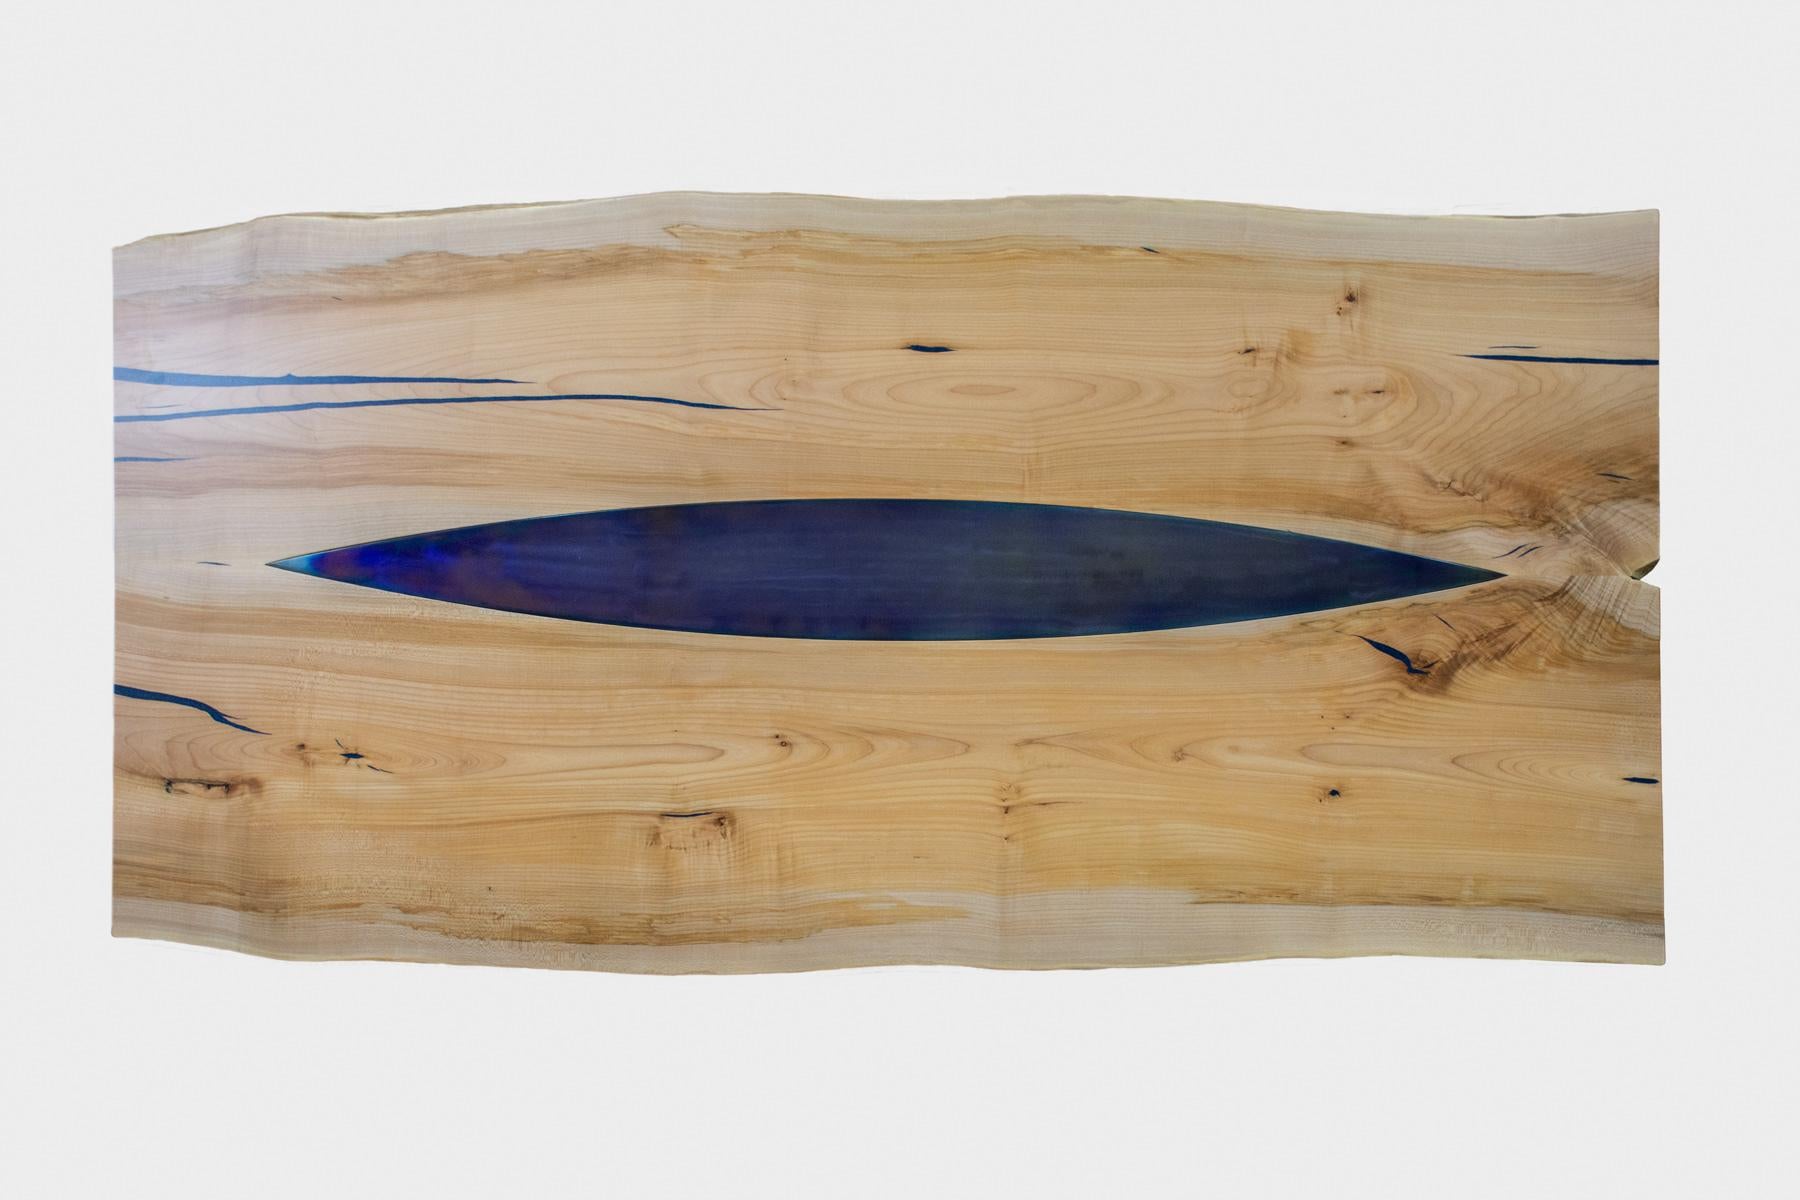 Live Edge dining table made from solid maple with blue steel inlay and gun metal steel base.

Live Edge slabs of solid western maple from he same tree have been paired and joined by a central 'kayak' shaped steel inlay. The steel has been 'blued'